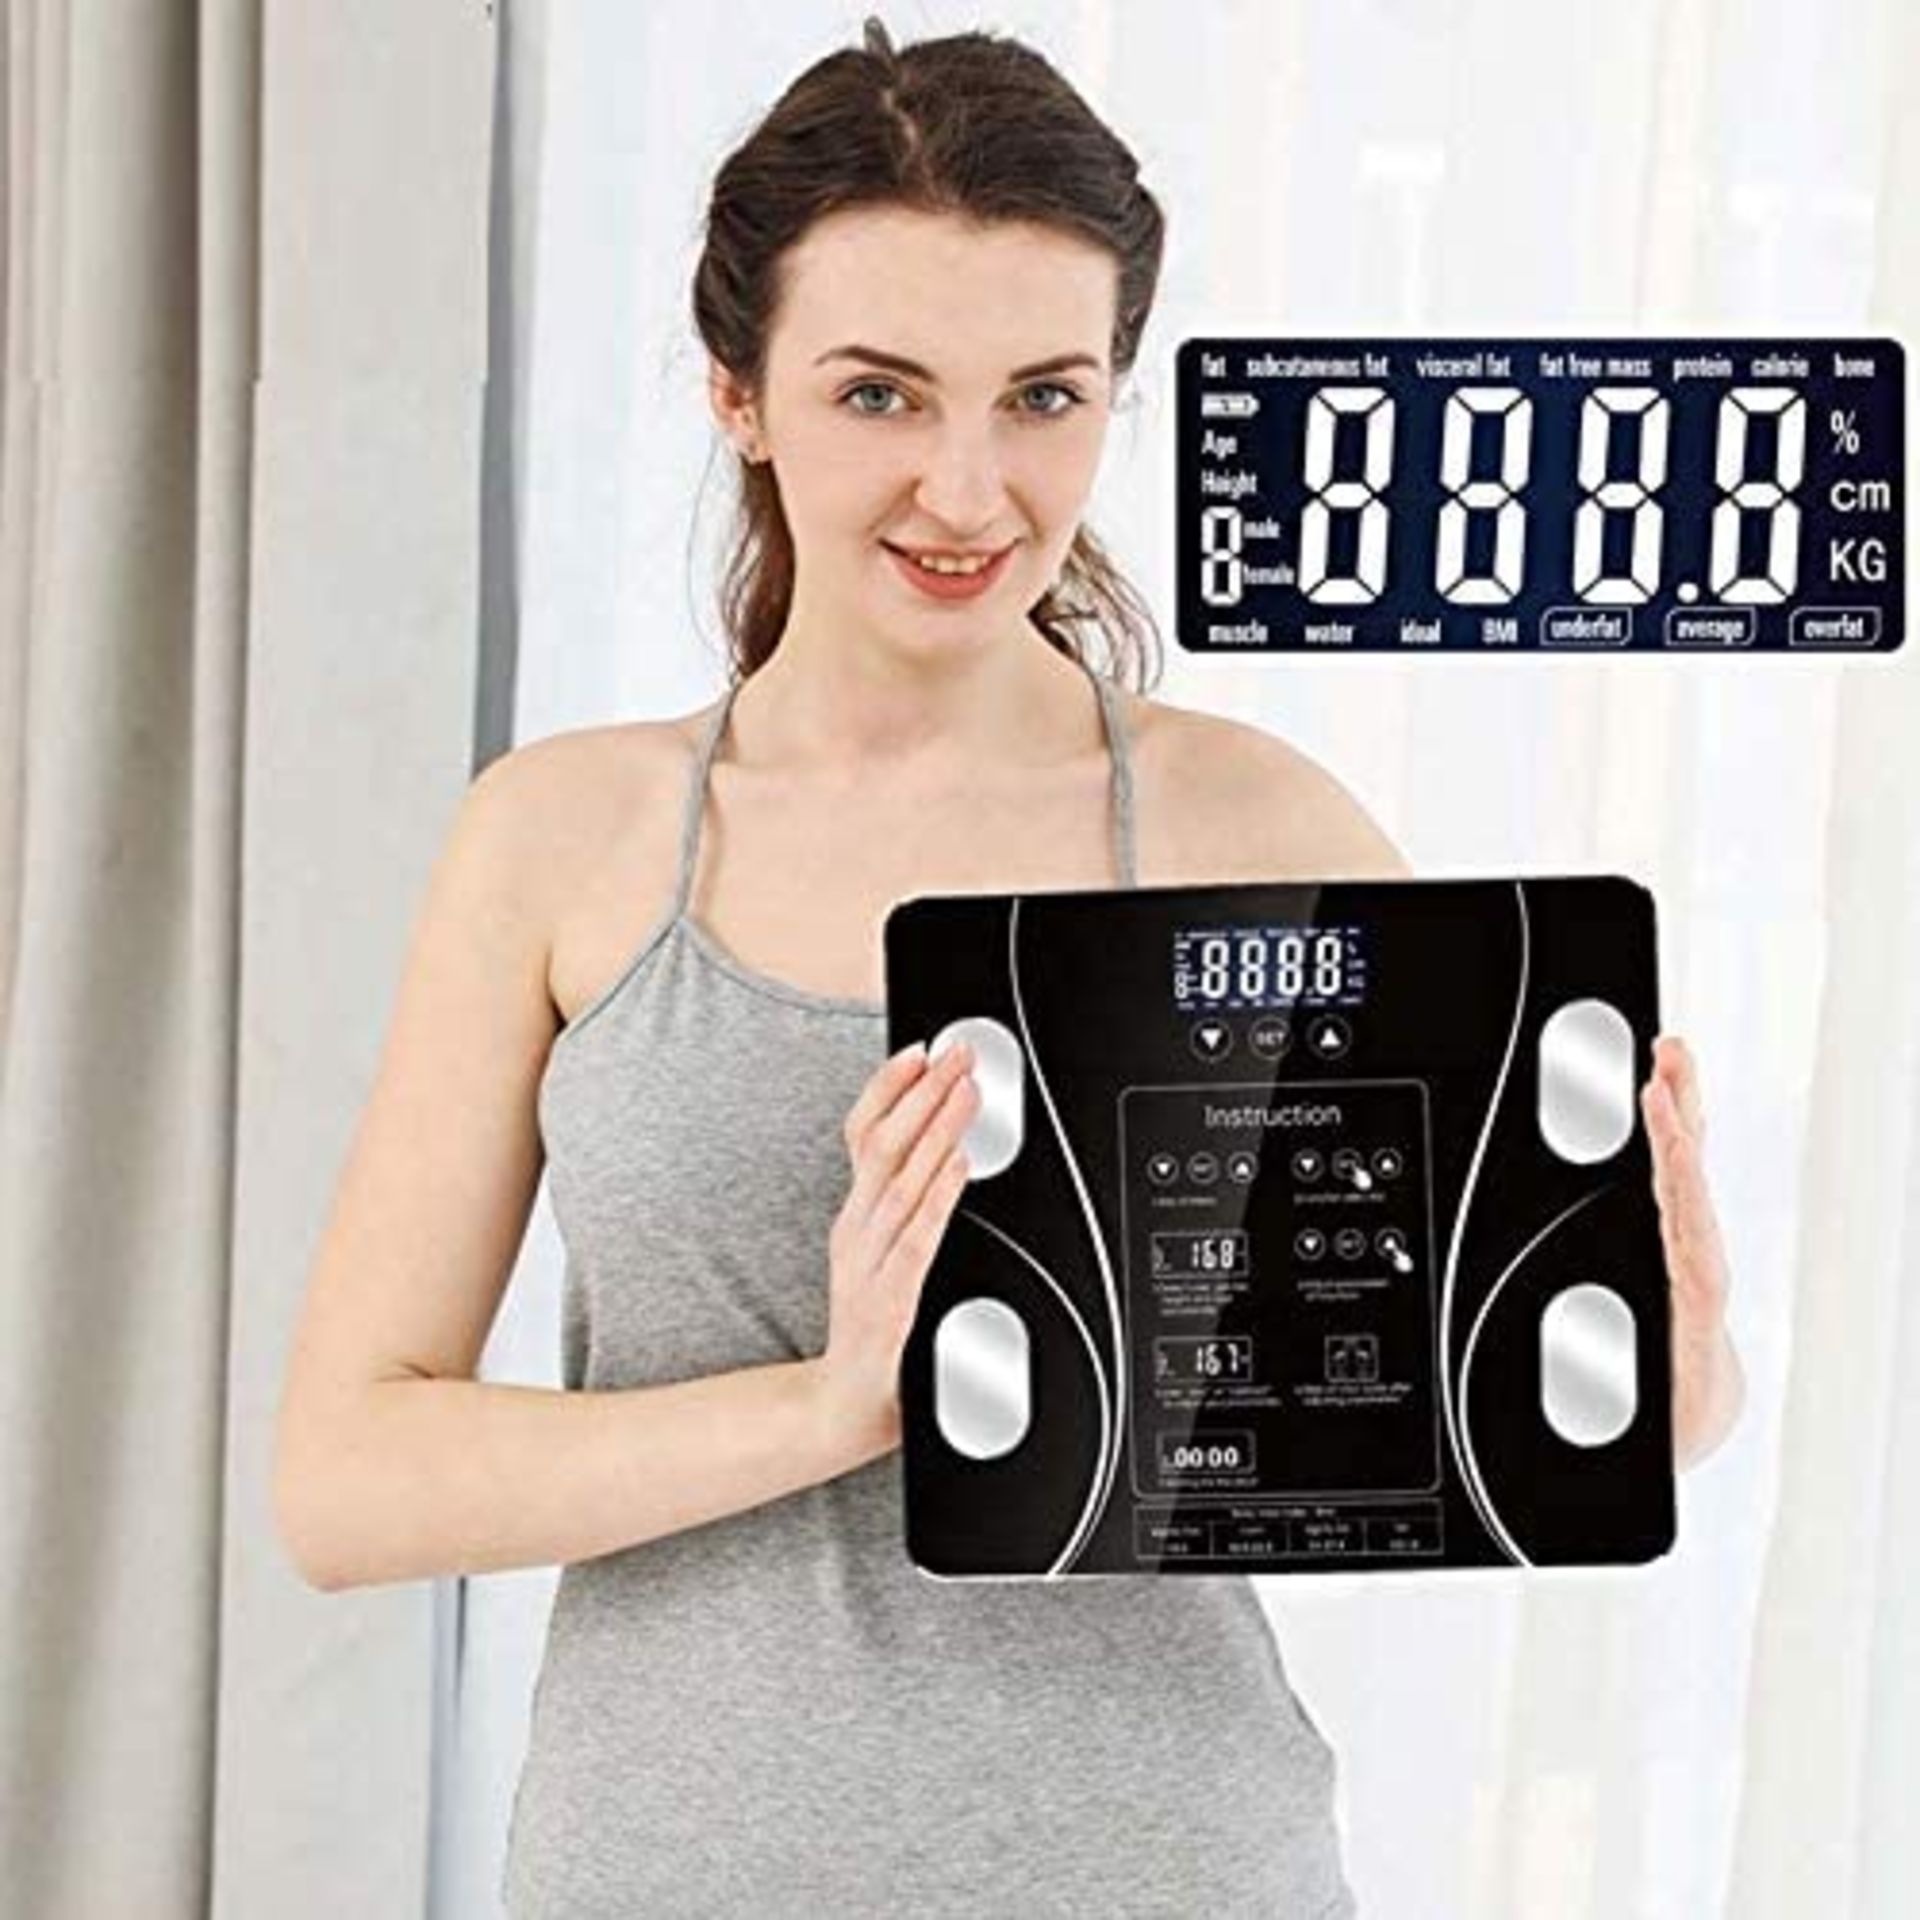 Exeton, Body Weighing Scale, Bluetooth Smart, Body Fat, BMI, 180Kg/396Lbs, USB Rechargeable - Image 9 of 10